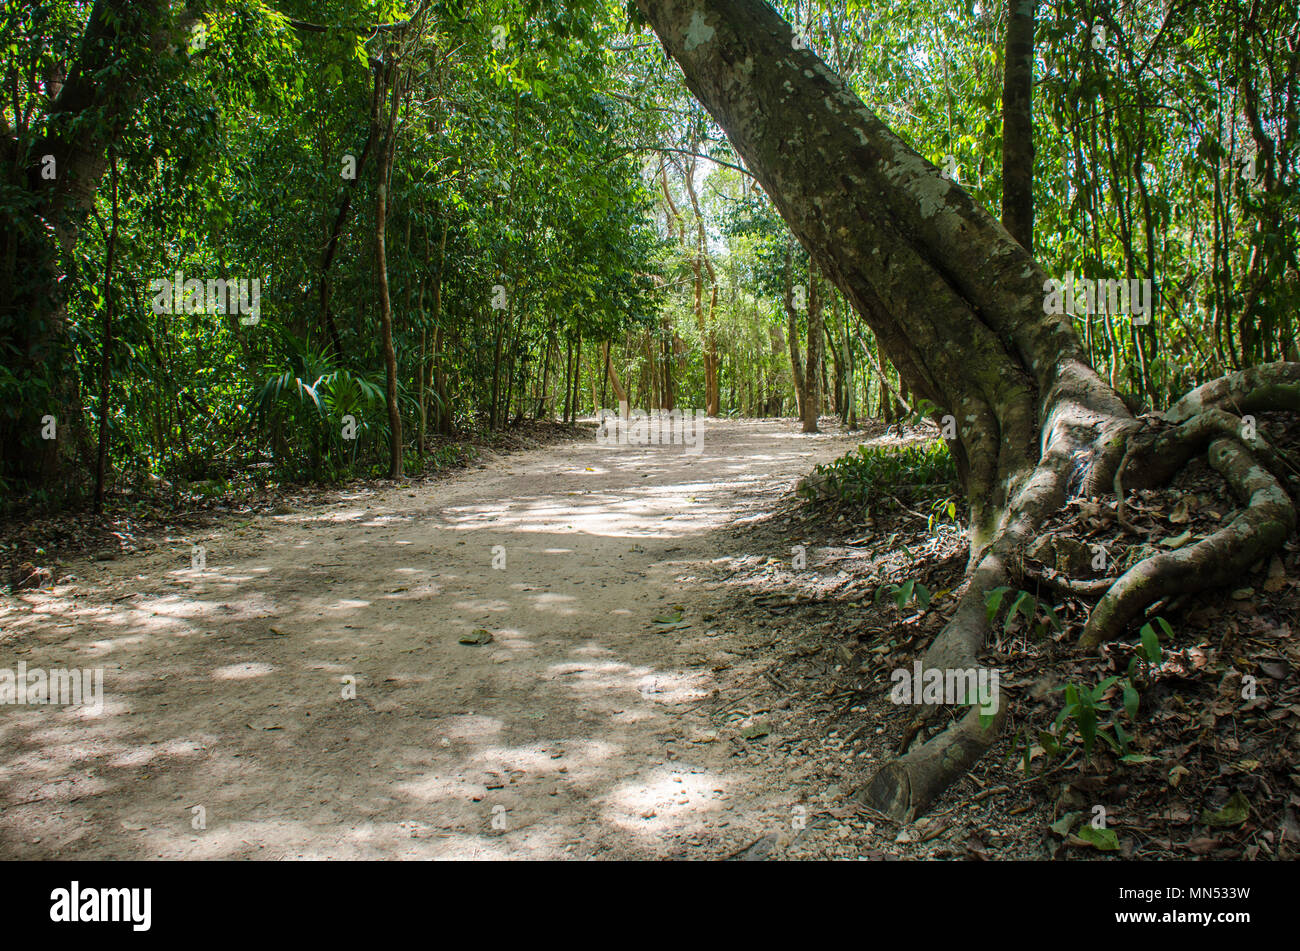 Road created by the ancient mayas at the Coba Jungle, Mexico Stock Photo